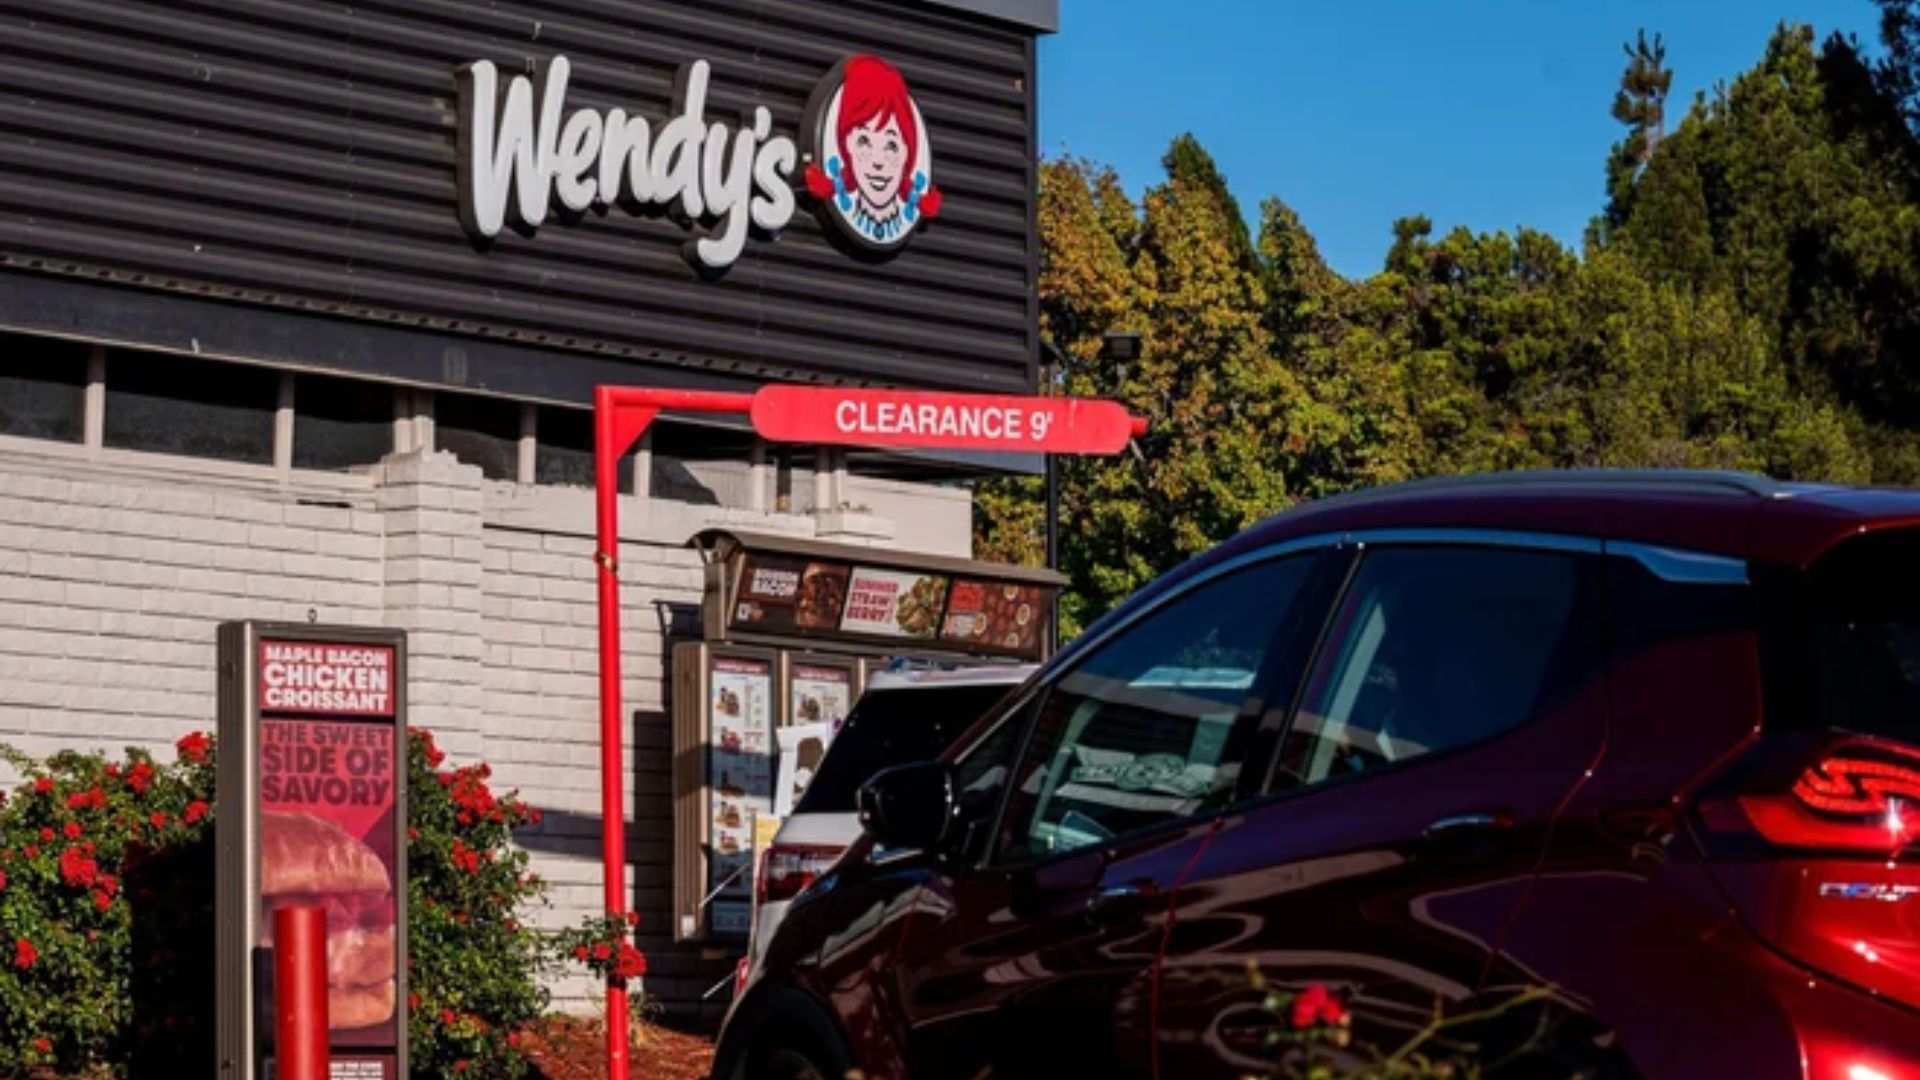 WENDY’S SURGE PRICING BACKLASH—WHAT MARKETERS CAN LEARN